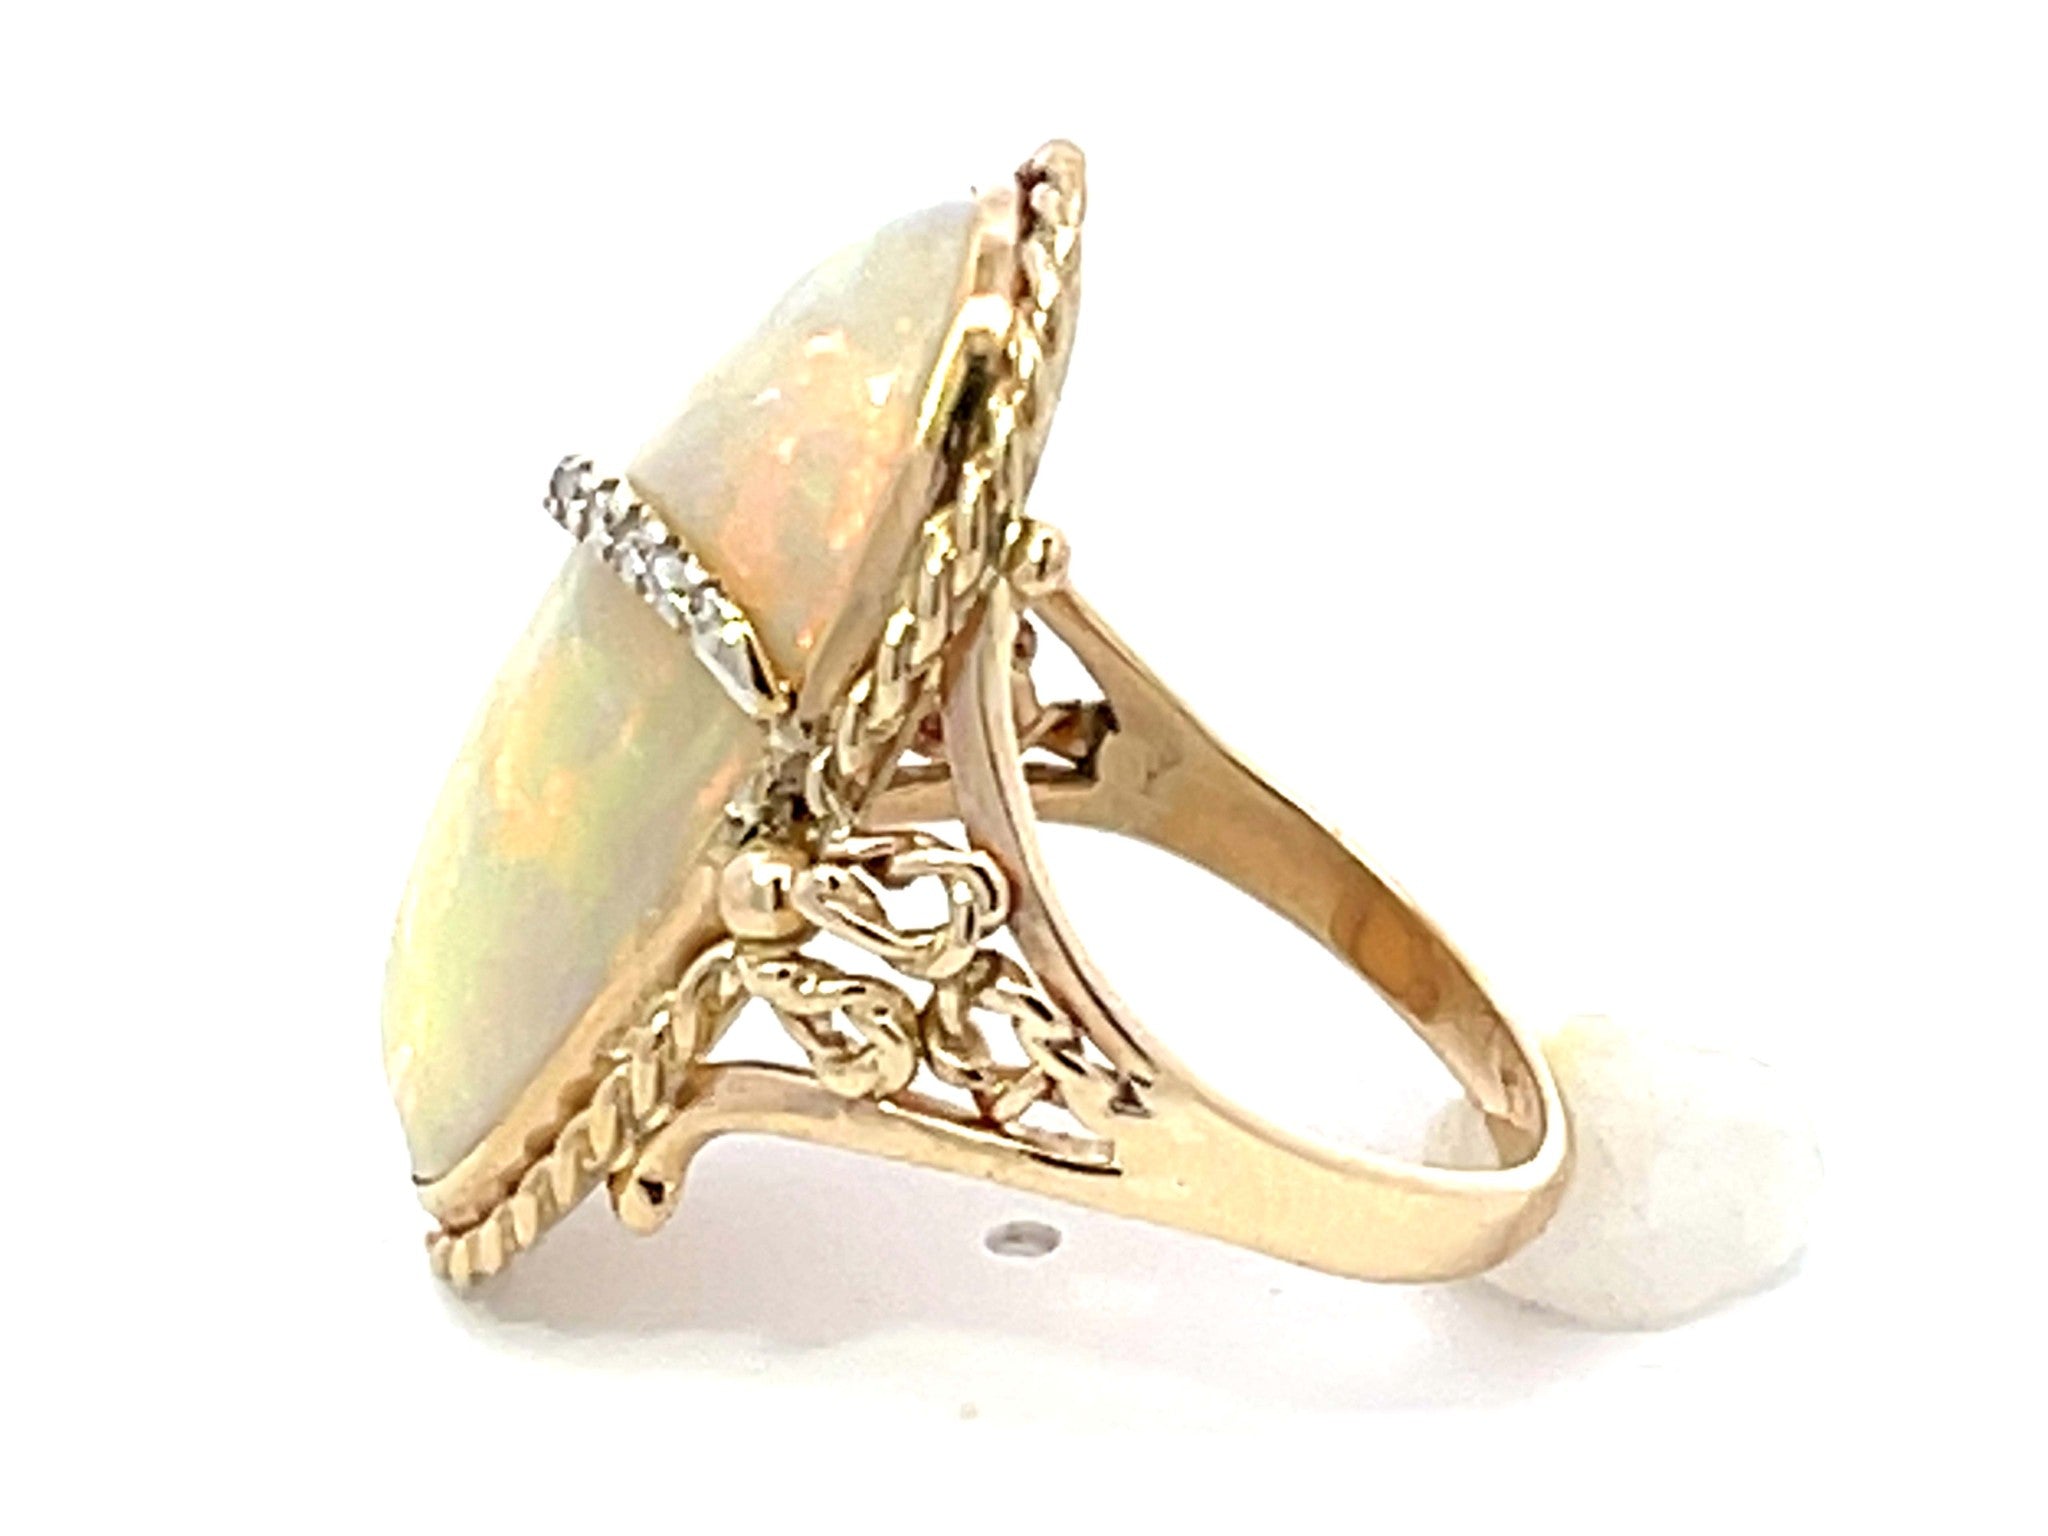 Large Oval Cabochon Opal and Diamond Ring in 14k Yellow Gold